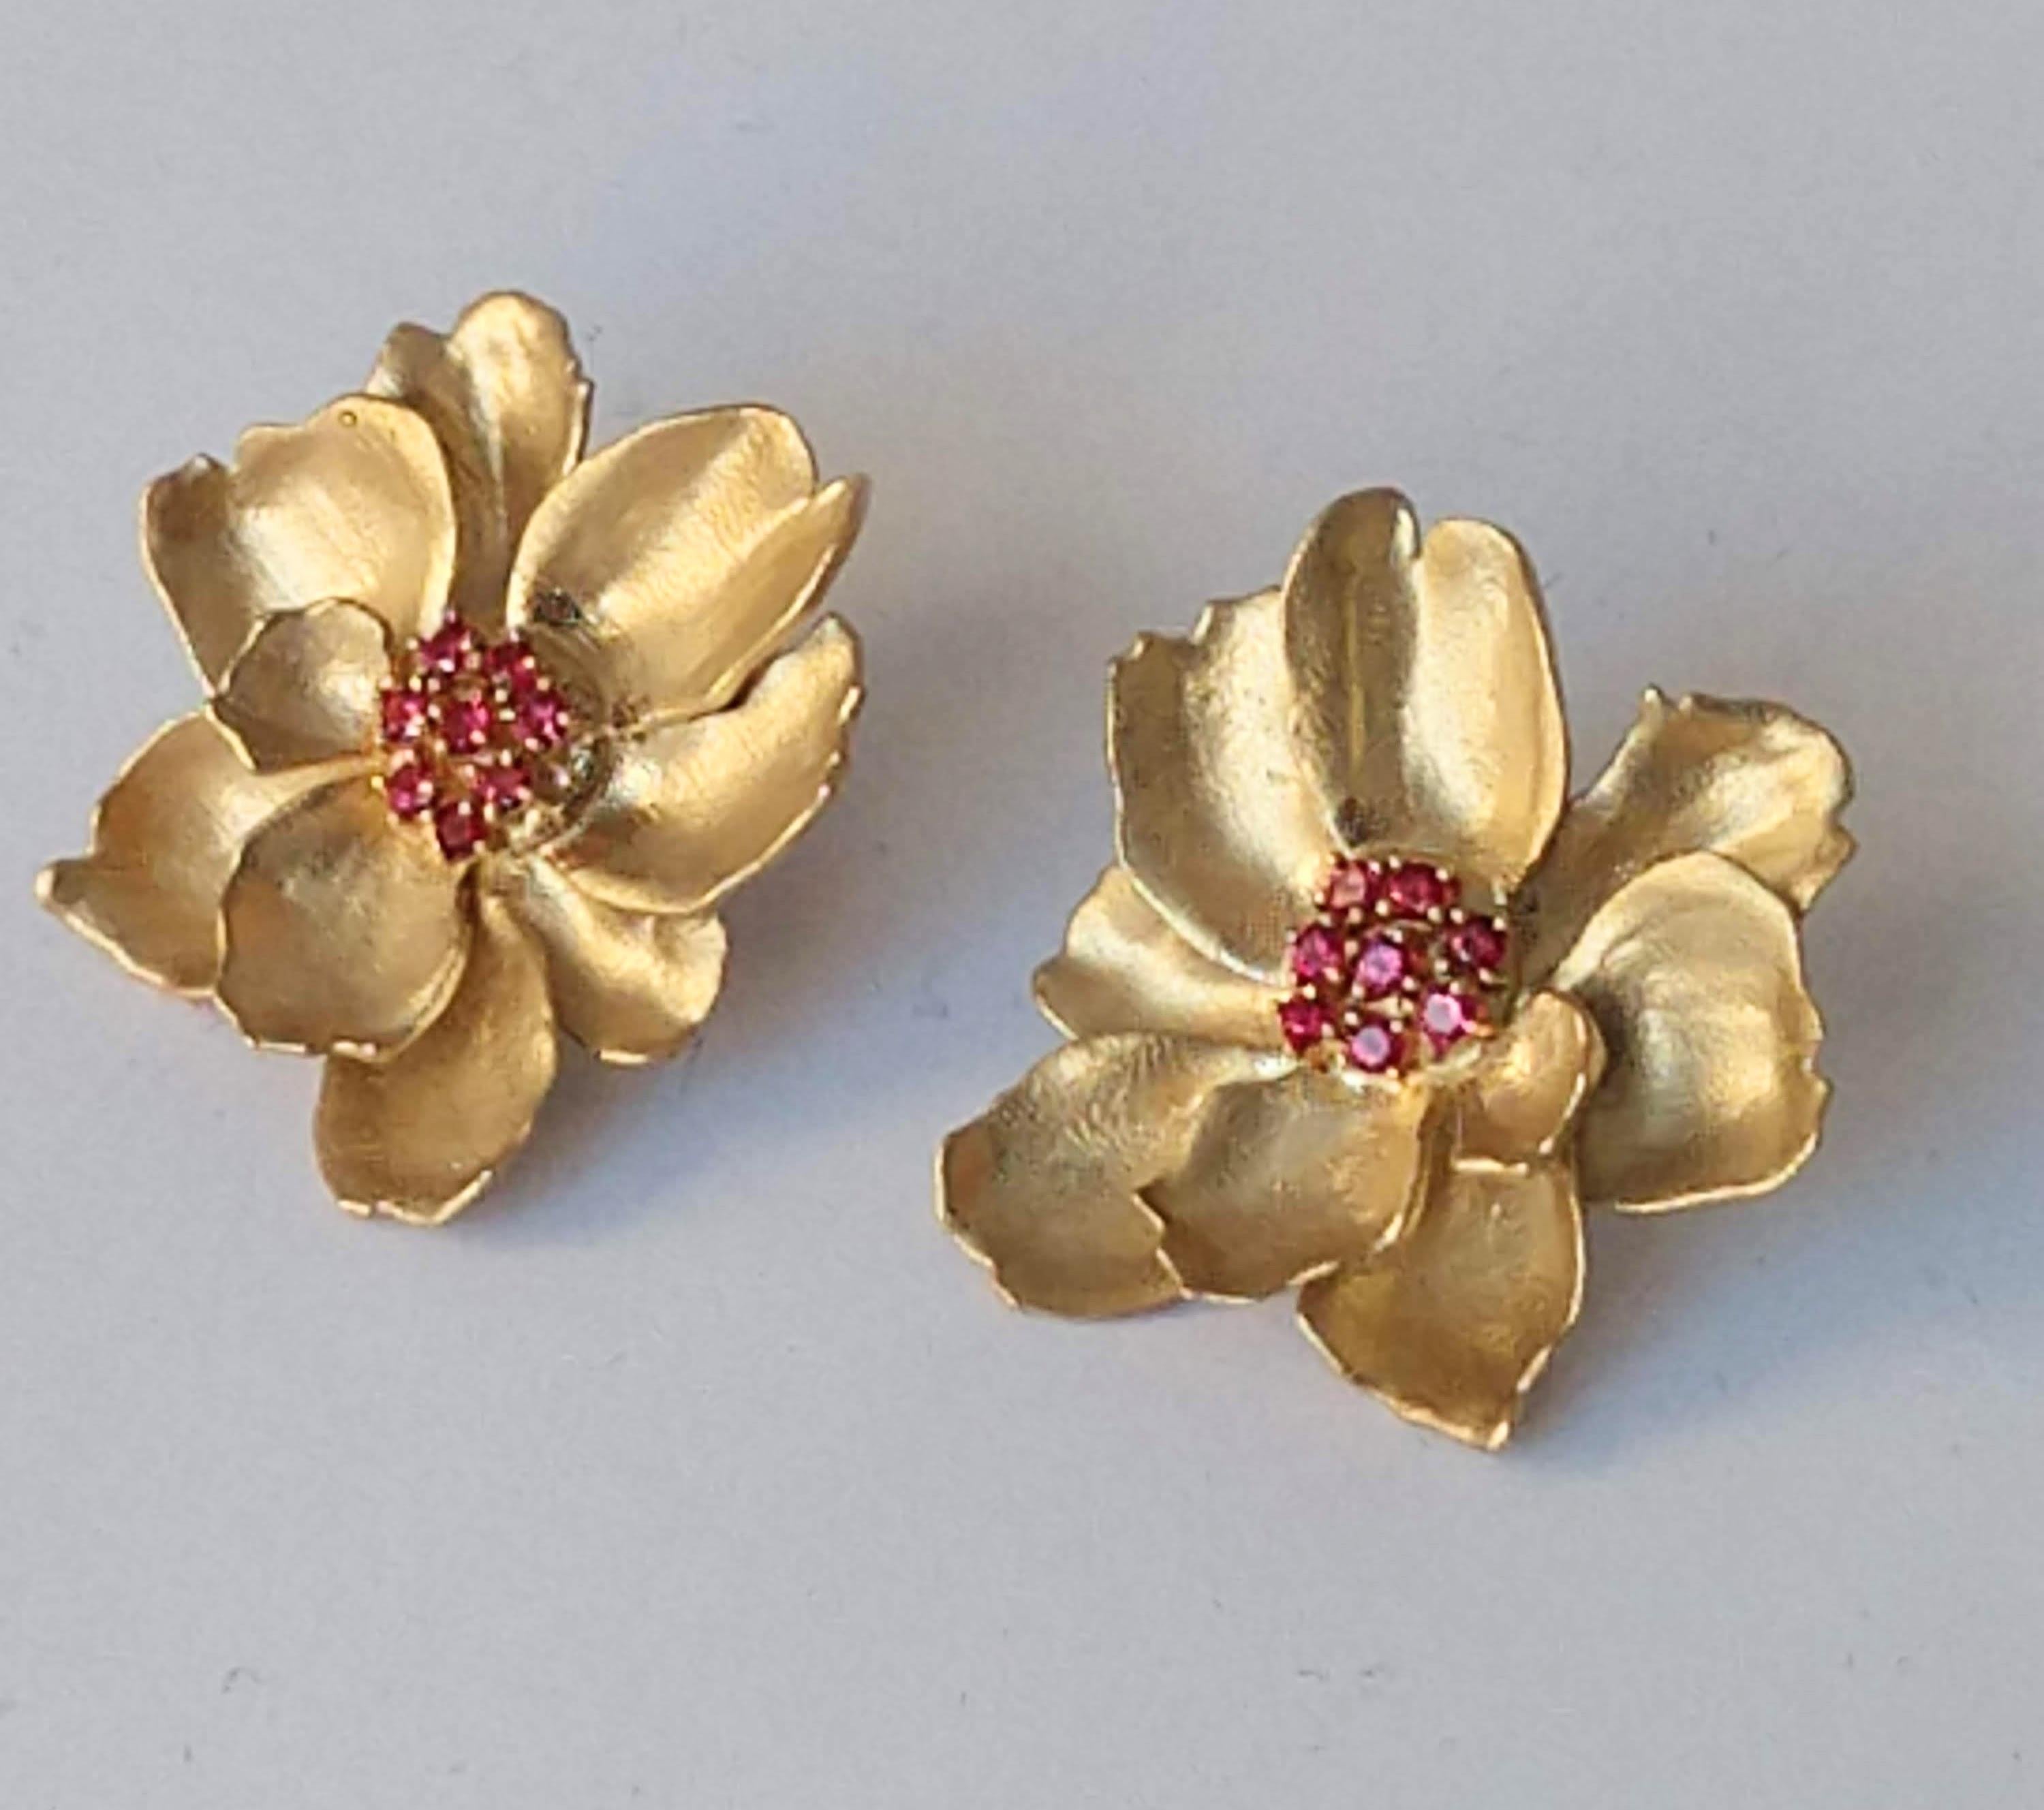 18 Karat White Gold Wild Flower Earrings with Rubies, Tiffany Designer Thomas Kurilla sculpted these exclusively for 1stdibs. Boredom causes us to challenge ourselves. Working from life especially during the covid  virus could push us two ways . To